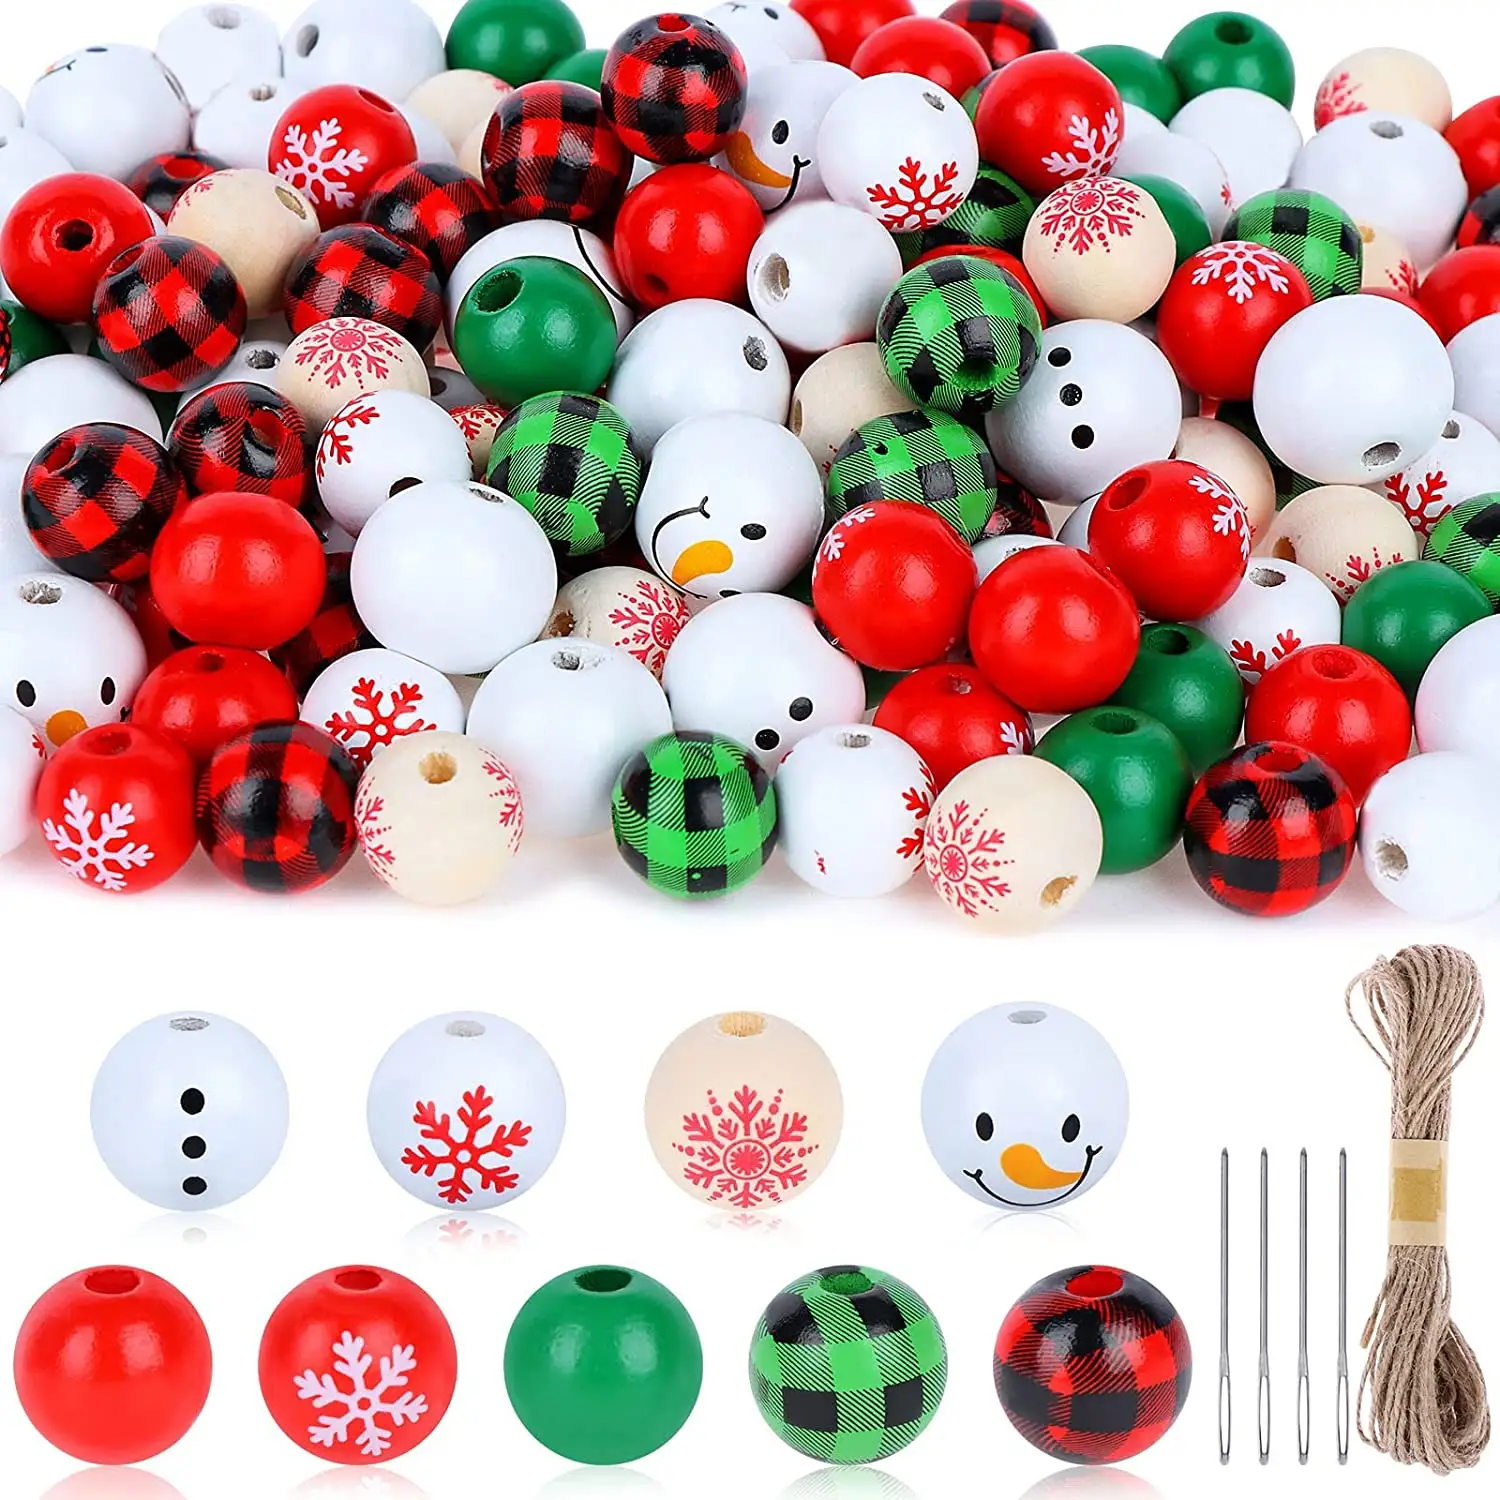 KRAFF Customization Christmas DIY Craft Garland Tree Decor Jewelry Making Wooden Beads with Hemp Rope for Party Holiday